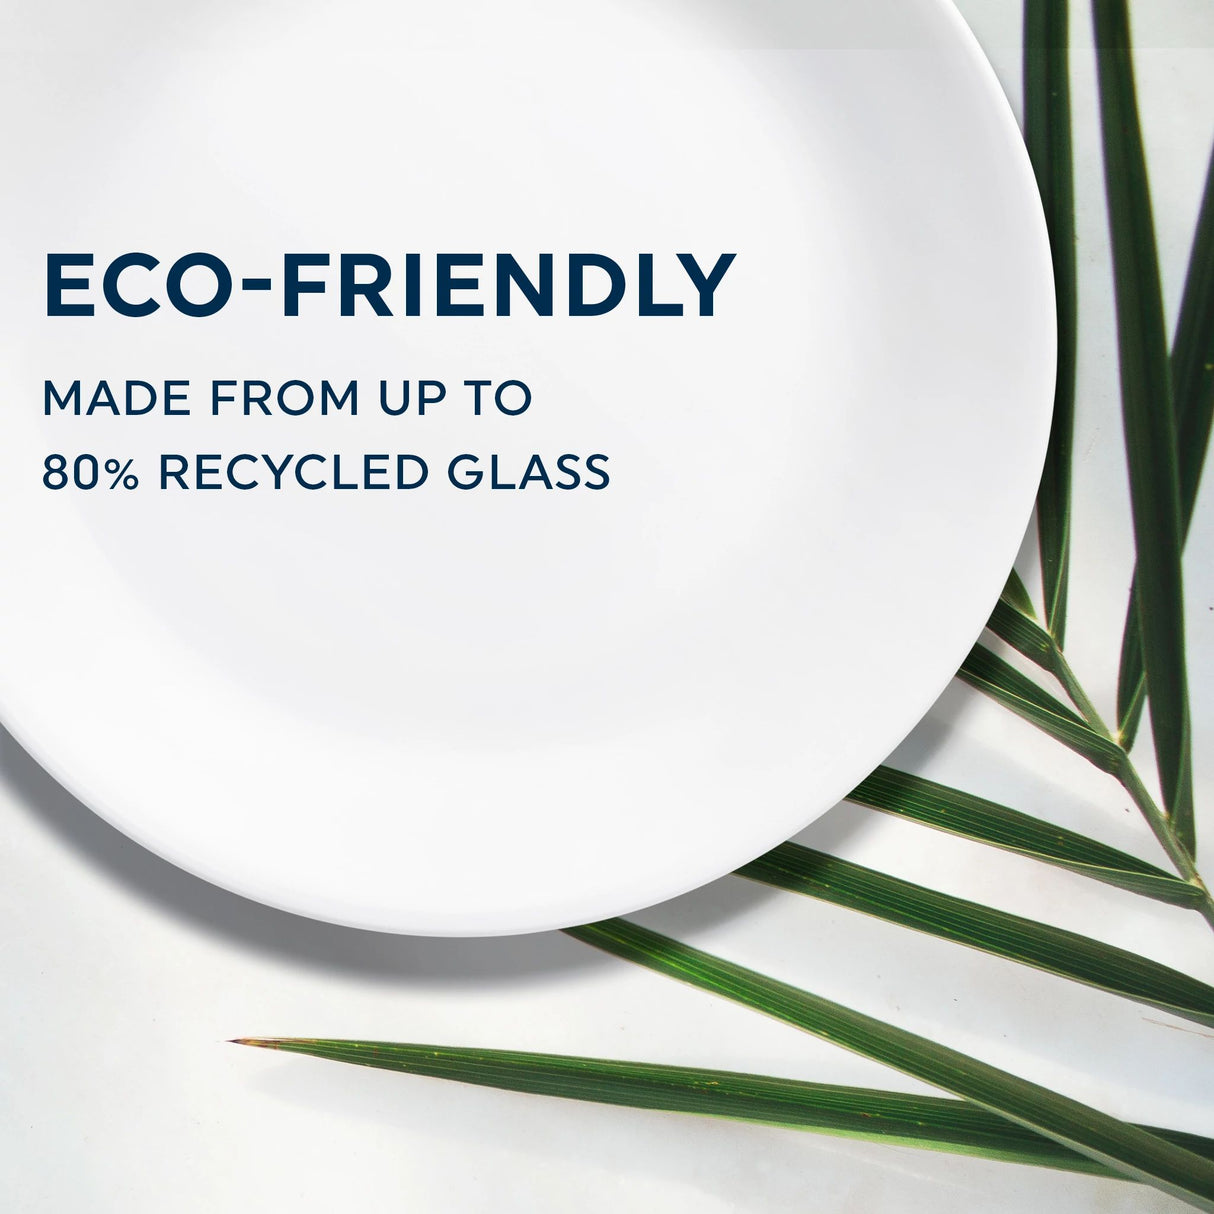  Winter Frost 10.25" dinner plate with text eco-friendly made from up to 80% recycled glass